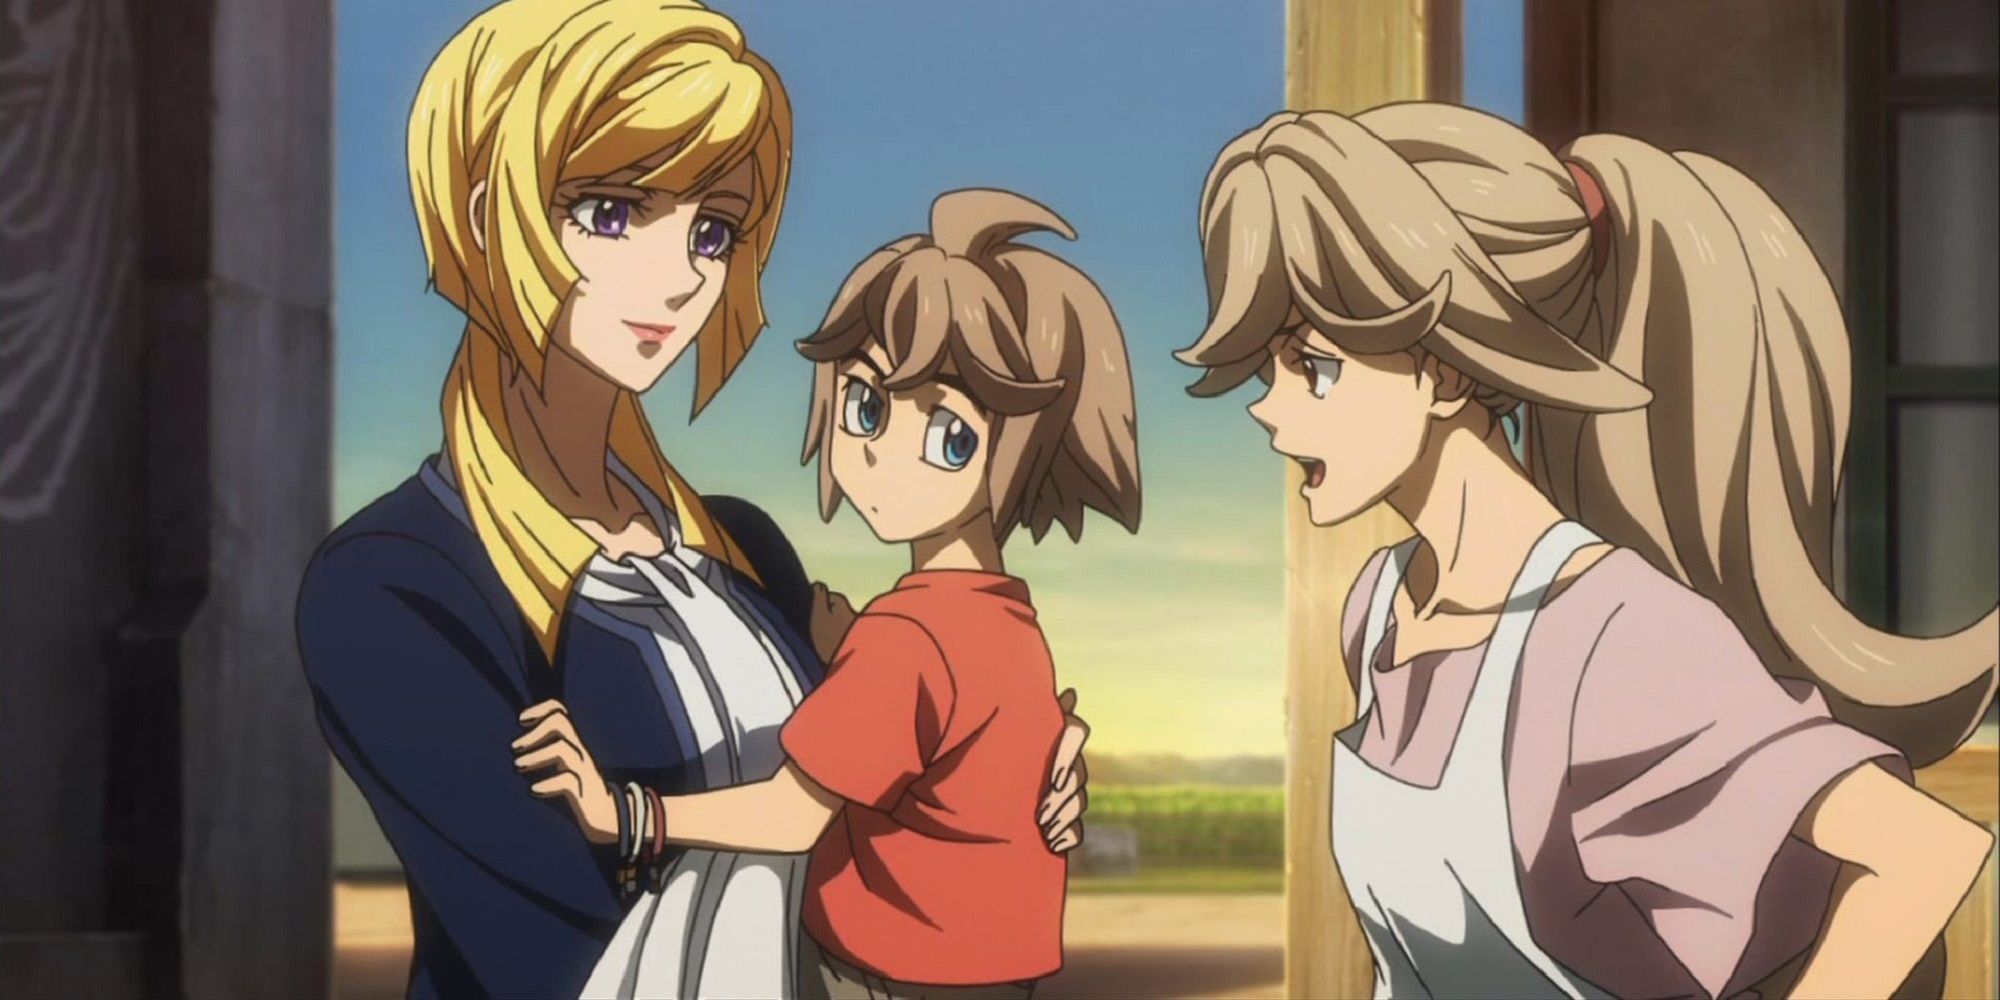 Kudelia, Atra, and Akatsuki in the Iron-Blooded Orphans finale